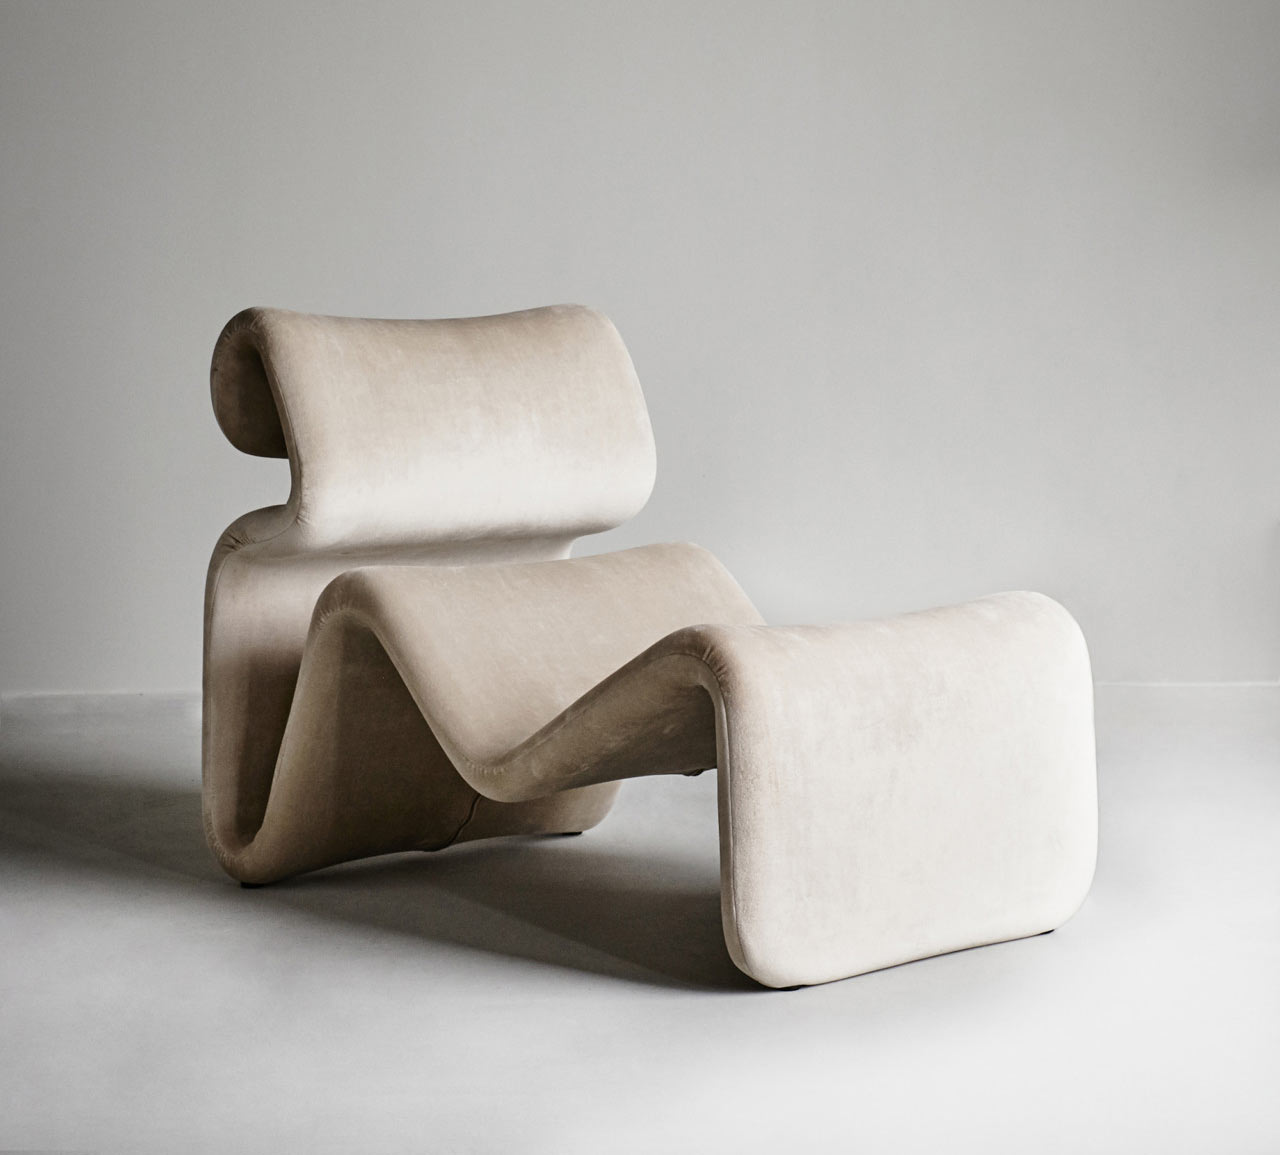 The Iconic Etcetera Chair Relaunches and Goes Ambre